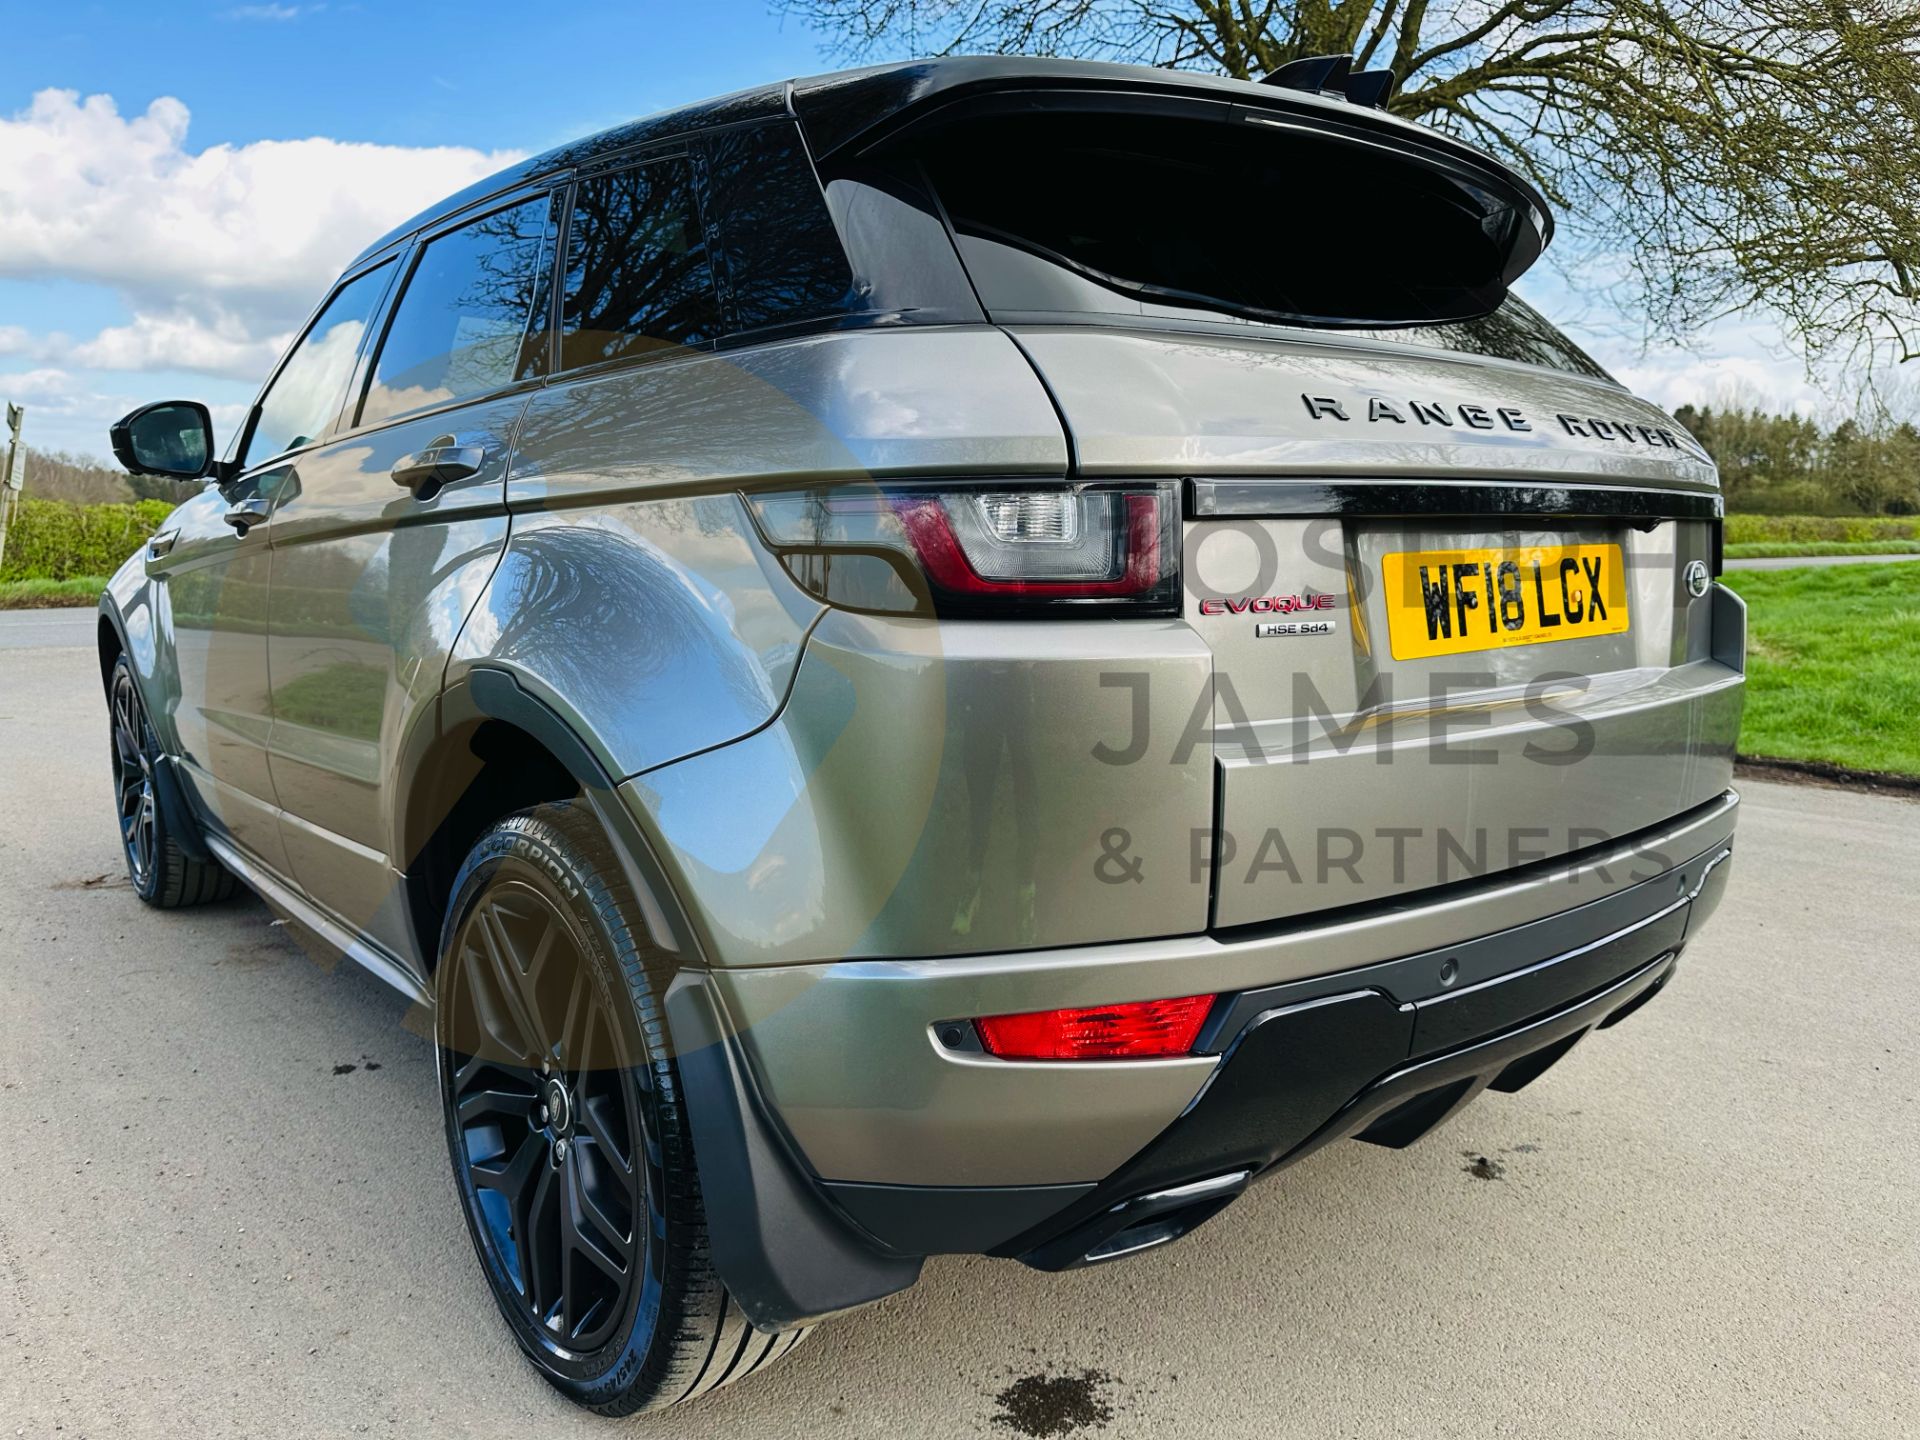 (On Sale) RANGE ROVER EVOQUE *HSE DYNAMIC* SUV (2018 - EURO 6) 2.0 SD4 - AUTOMATIC *ULTIMATE SPEC* - Image 9 of 48